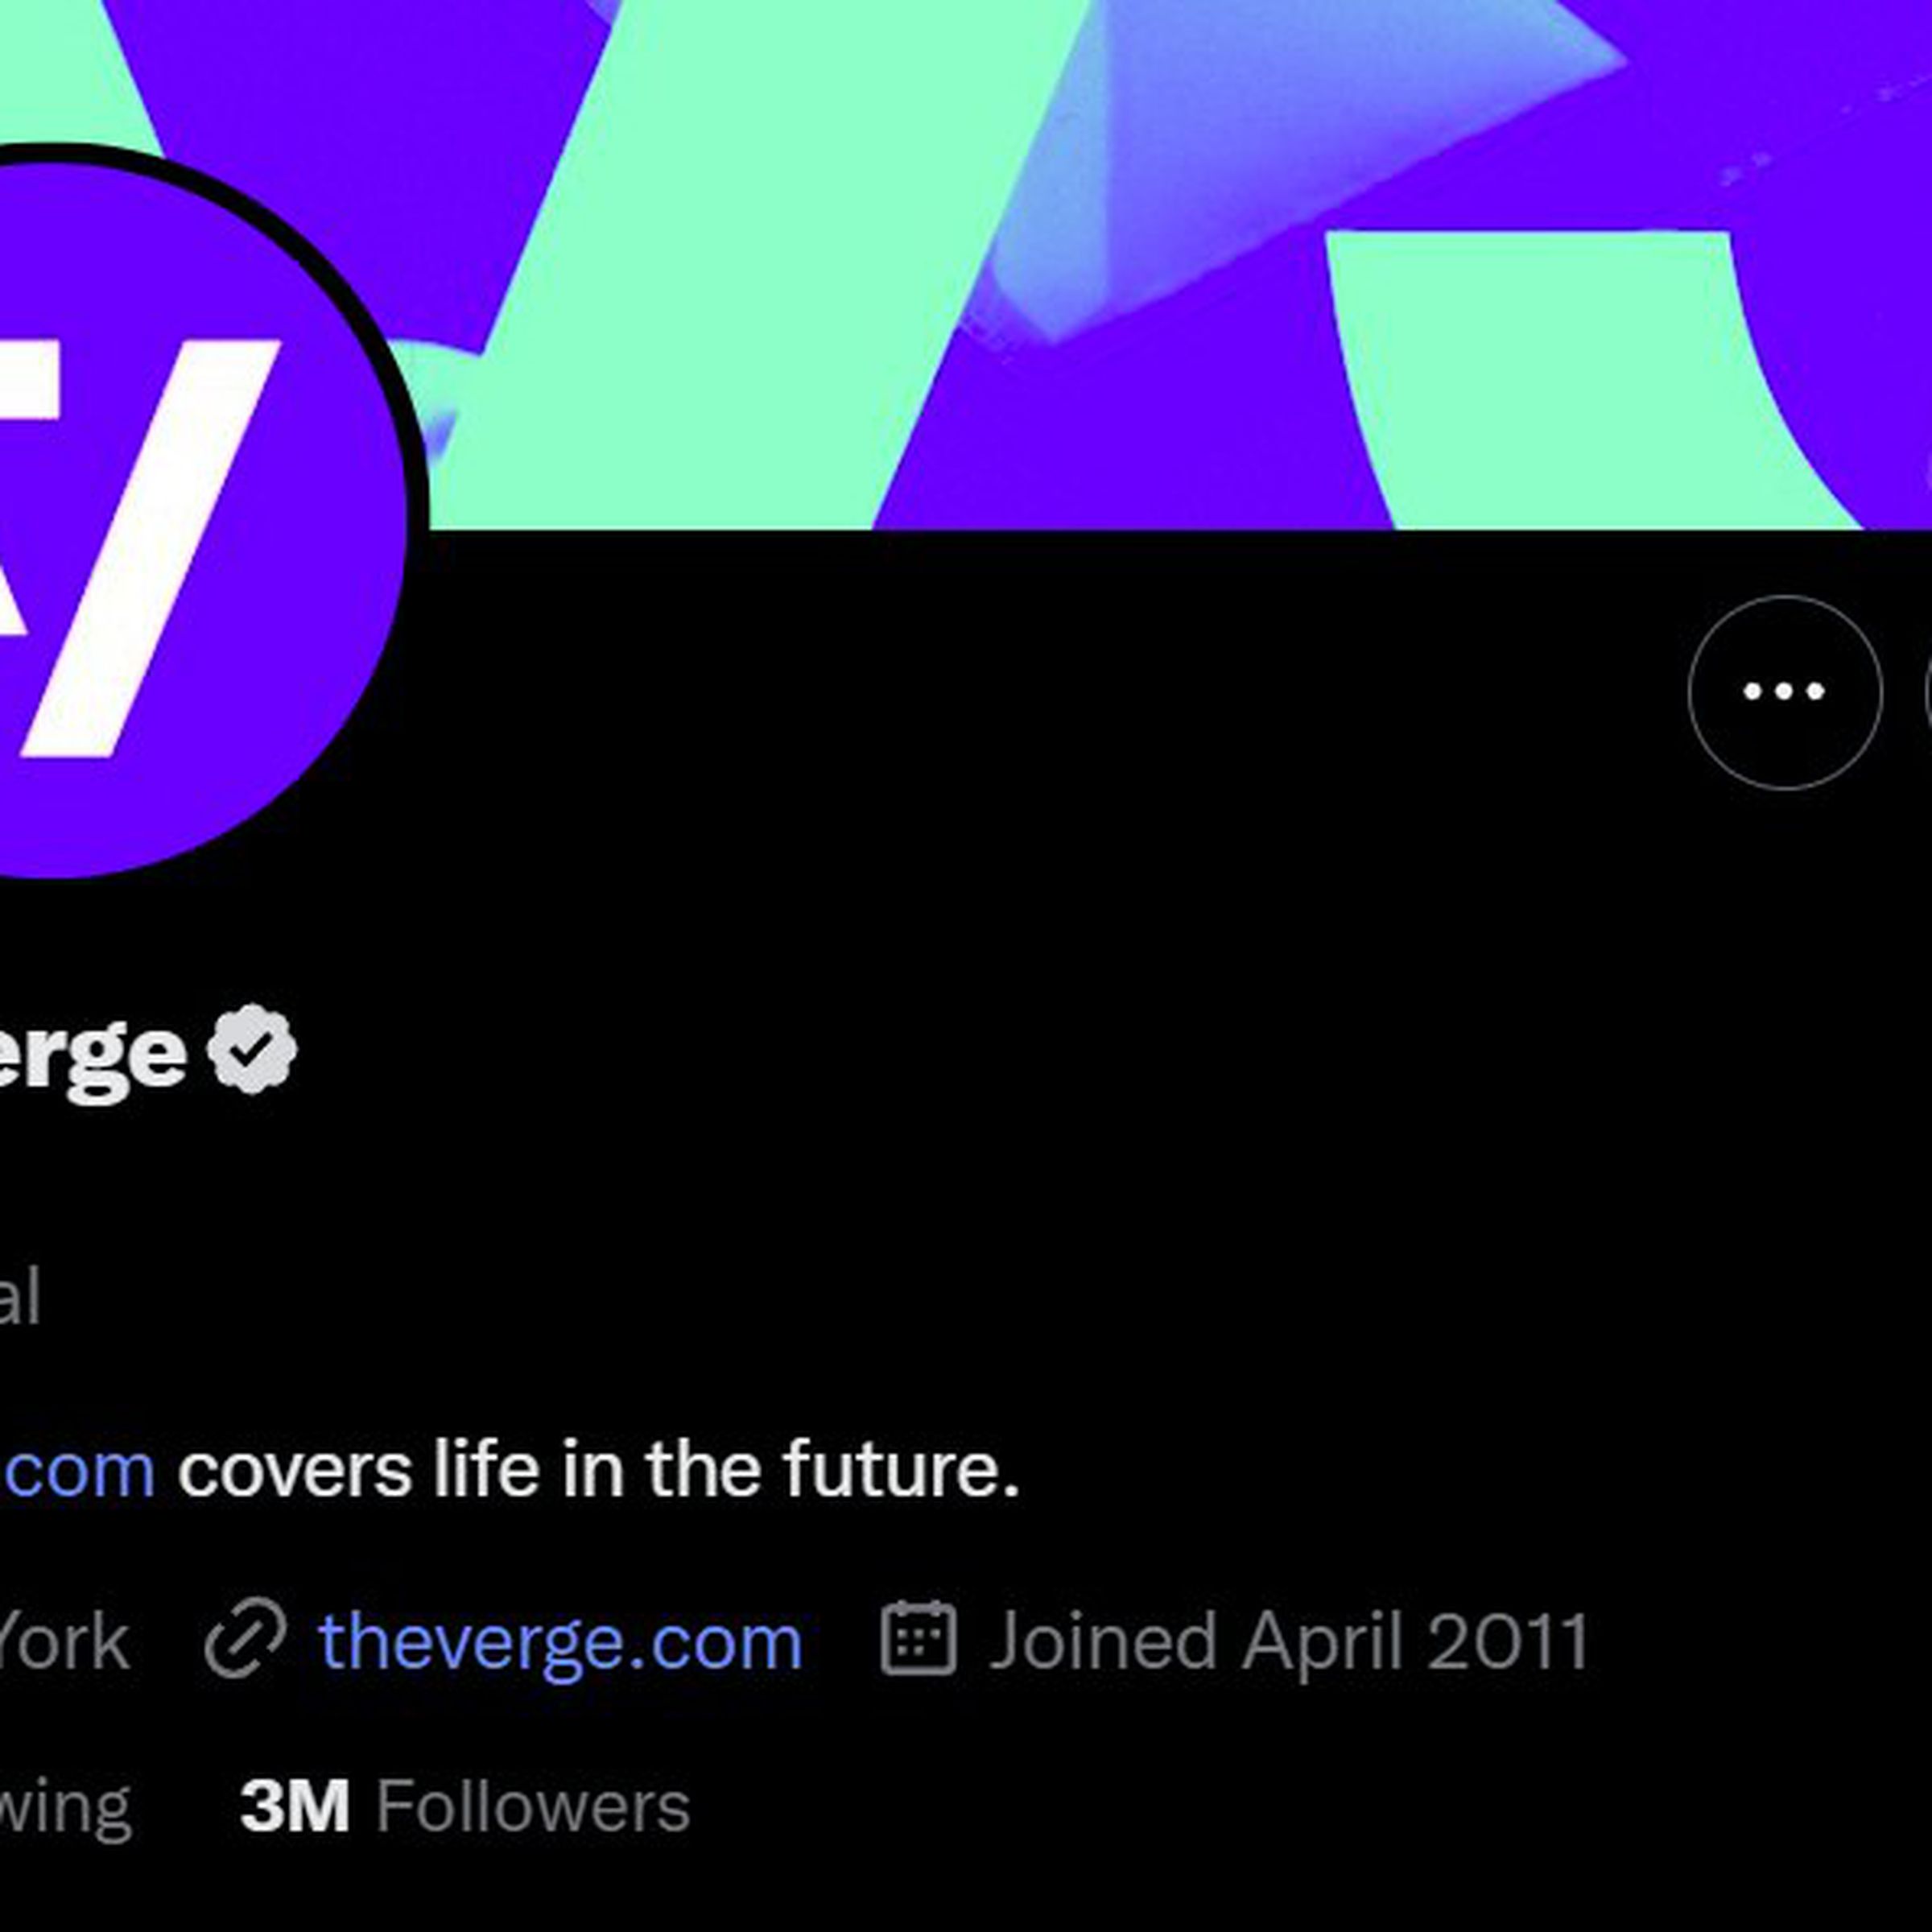 Twitter’s new gray “official” checkmark and label shown on the @Verge Twitter account.